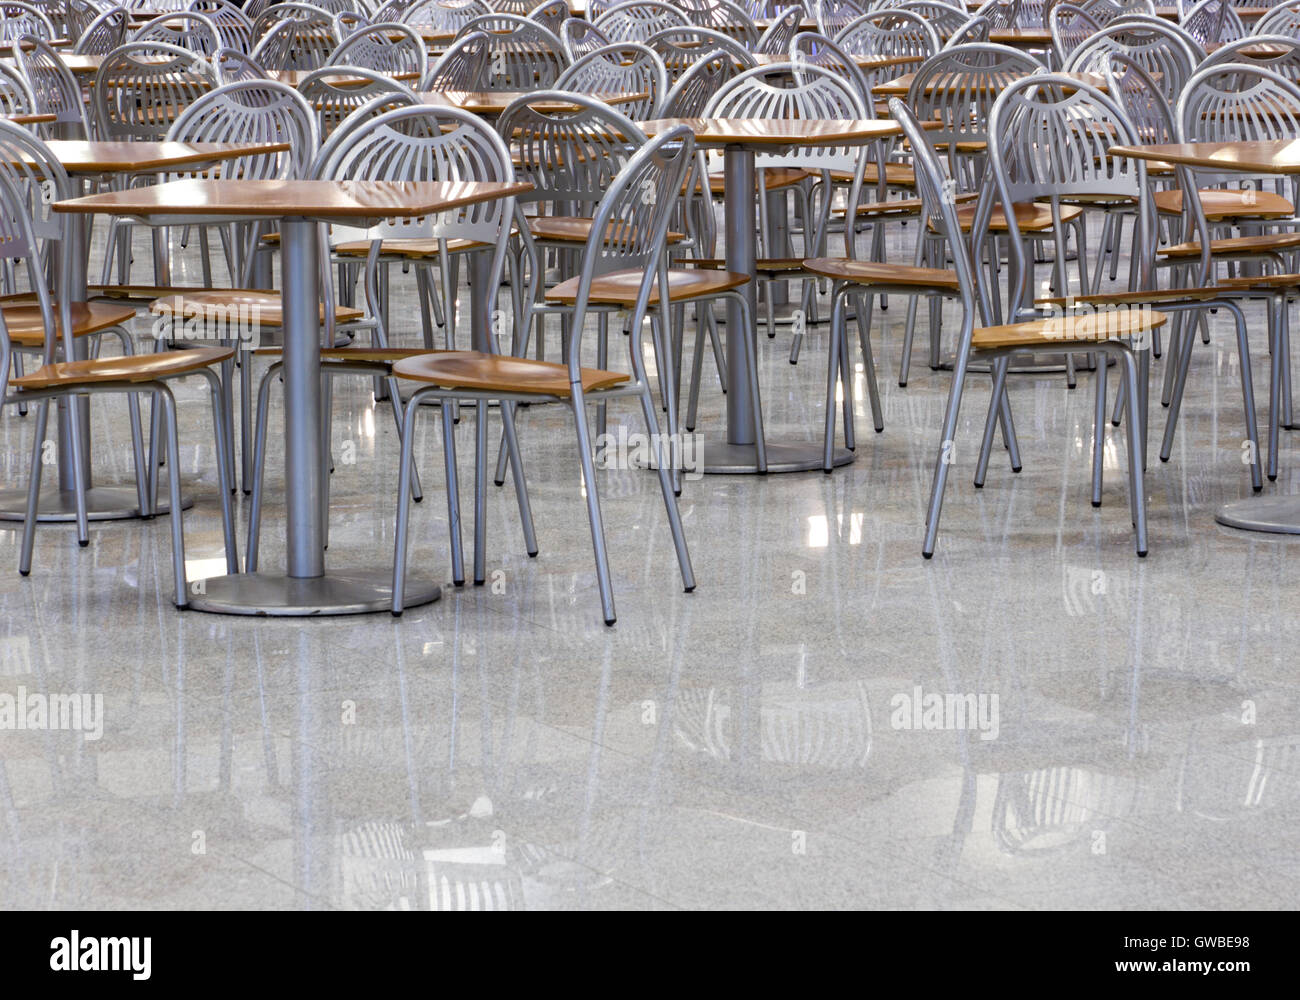 Interior of a modern contemporary fast food cafe or restaurant with chairs, tables and floor of stone which reflections. Stock Photo